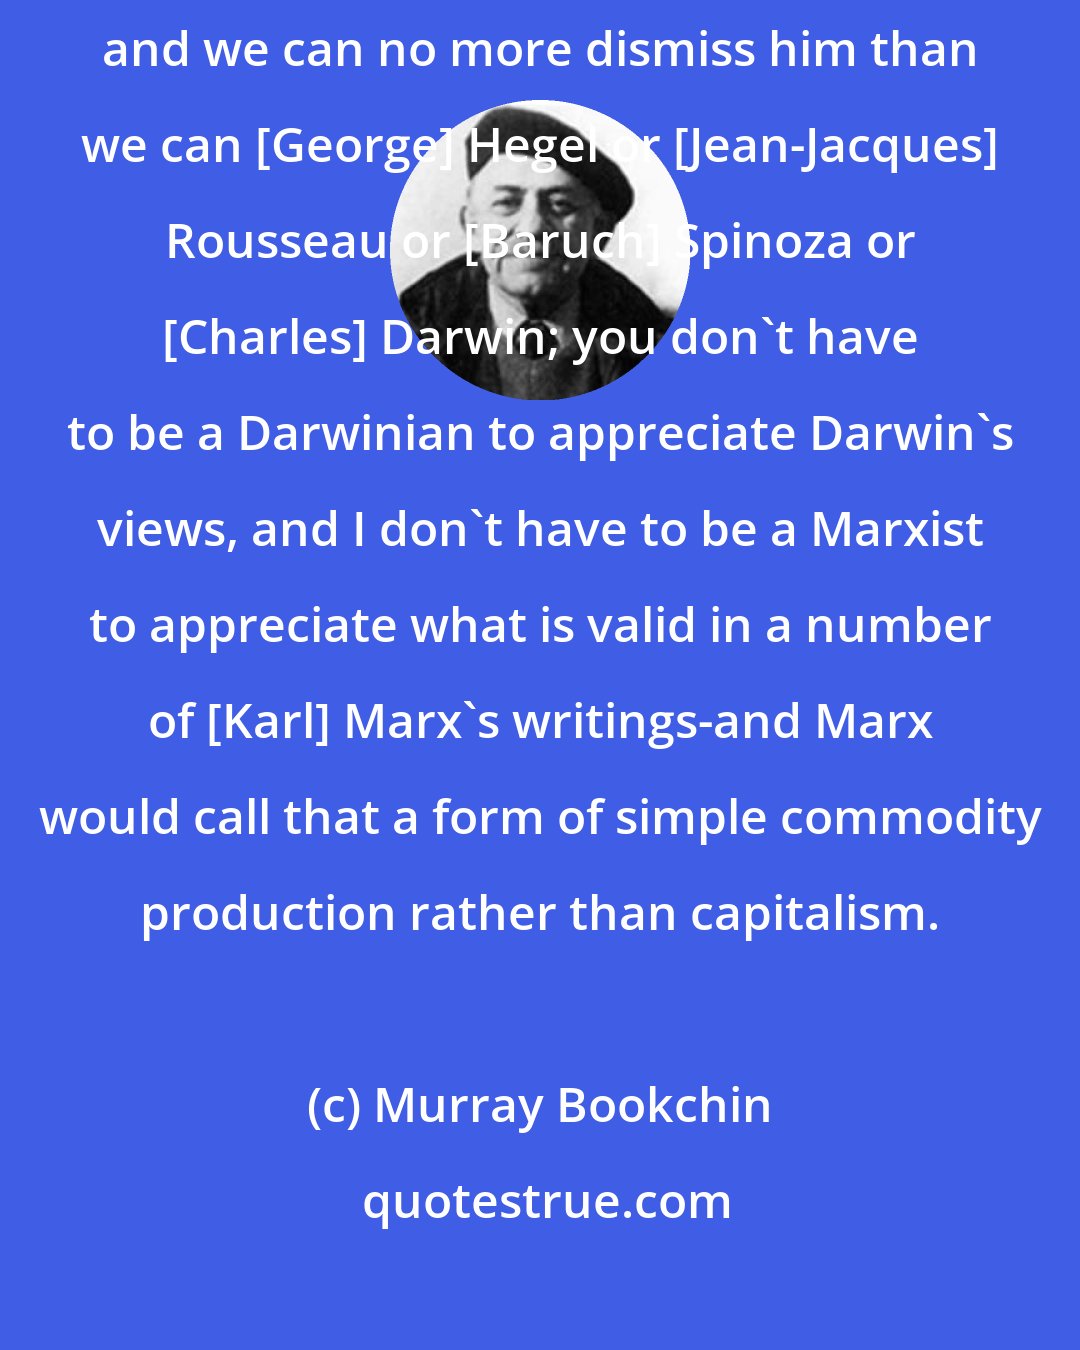 Murray Bookchin: There's a sense in which Marx does contribute to the fund of human knowledge, and we can no more dismiss him than we can [George] Hegel or [Jean-Jacques] Rousseau or [Baruch] Spinoza or [Charles] Darwin; you don't have to be a Darwinian to appreciate Darwin's views, and I don't have to be a Marxist to appreciate what is valid in a number of [Karl] Marx's writings-and Marx would call that a form of simple commodity production rather than capitalism.